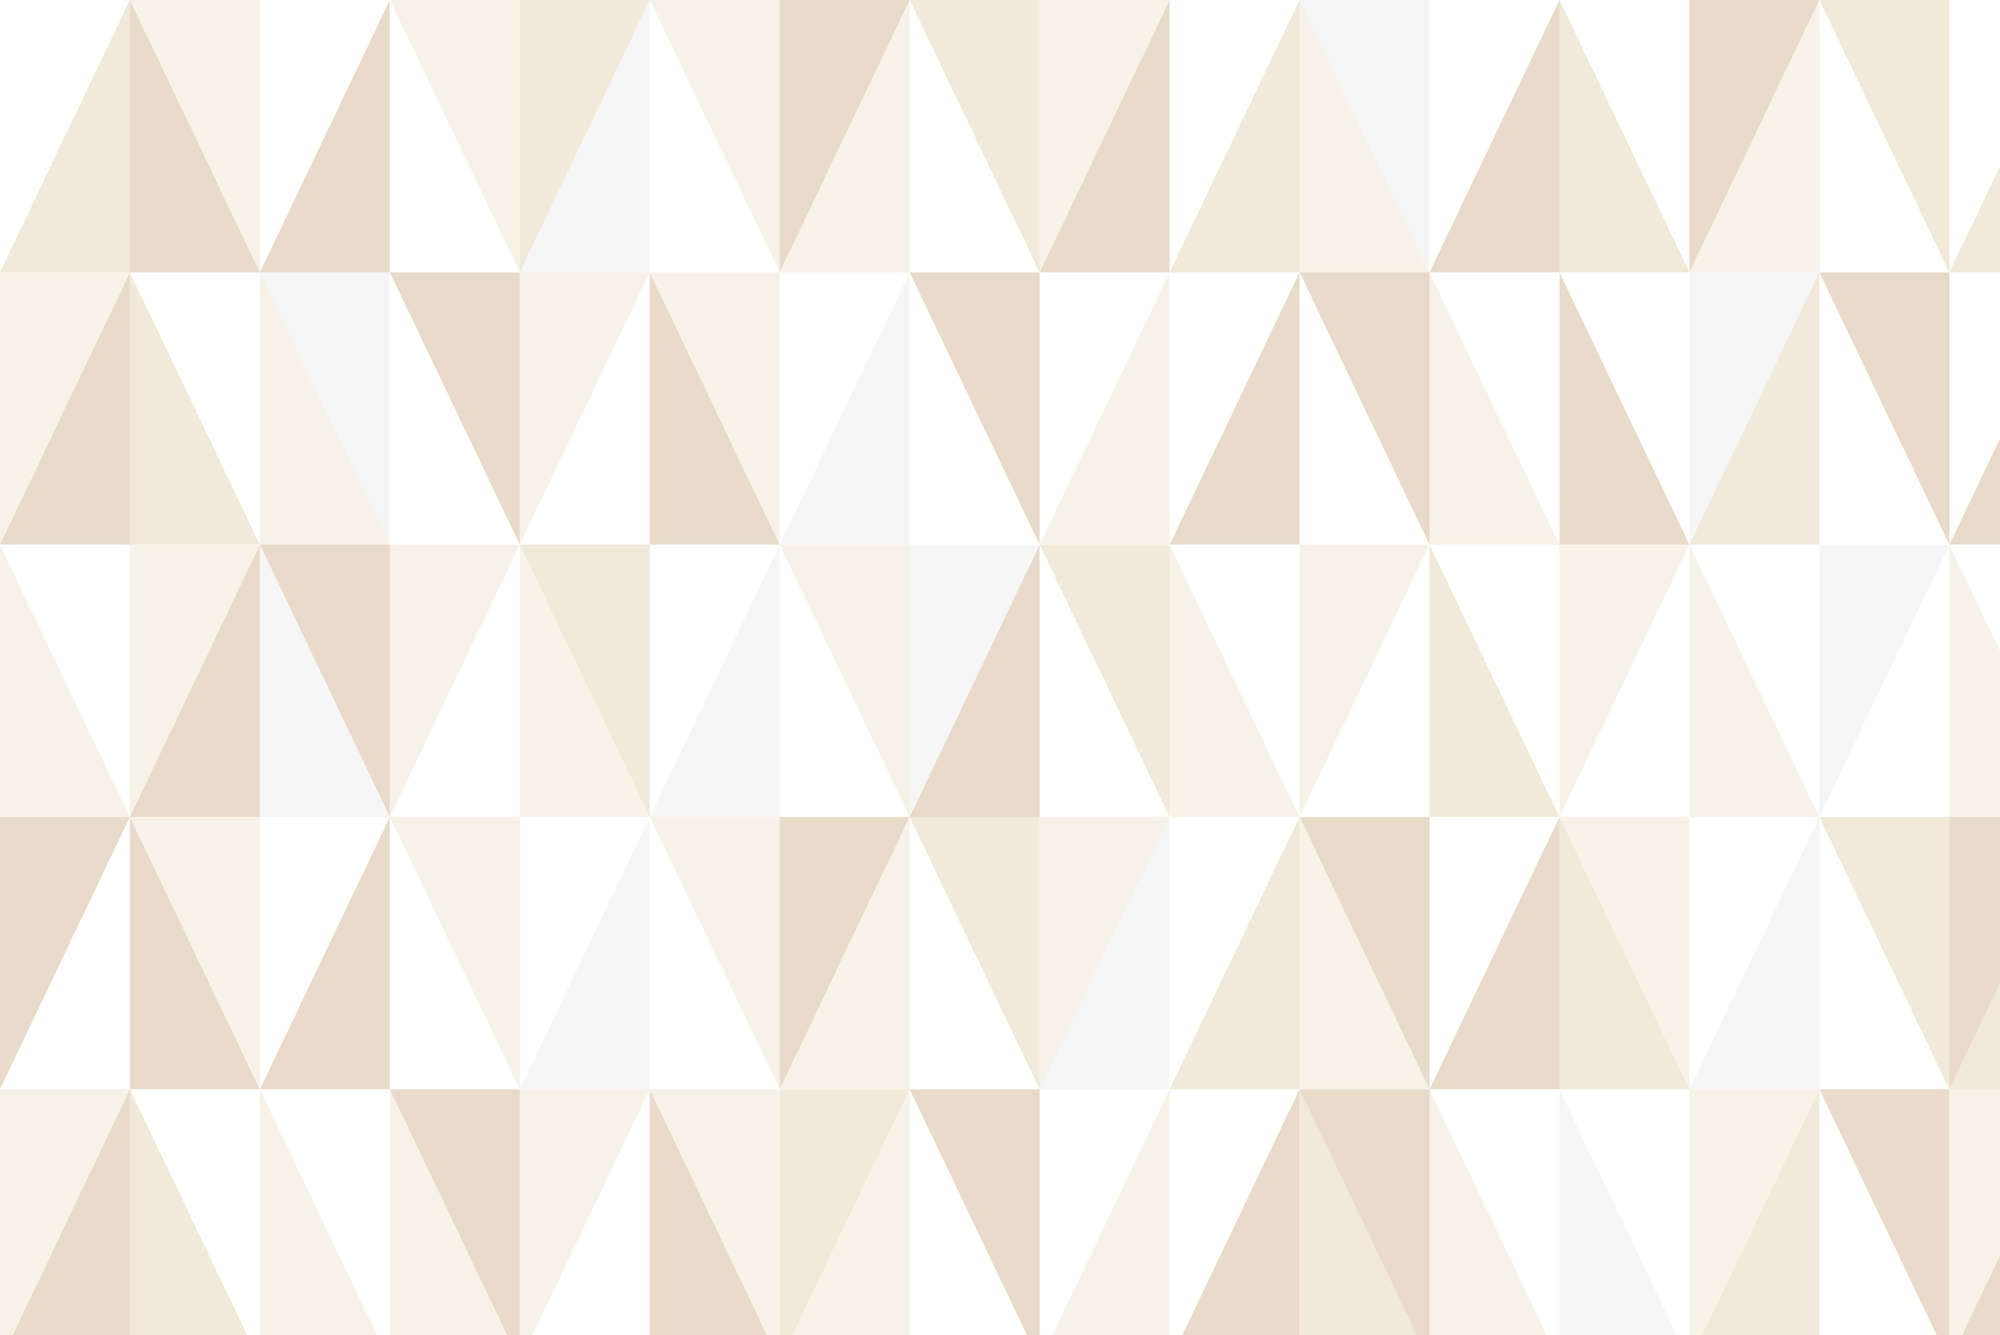             Design wall mural with small triangles beige on textured non-woven
        